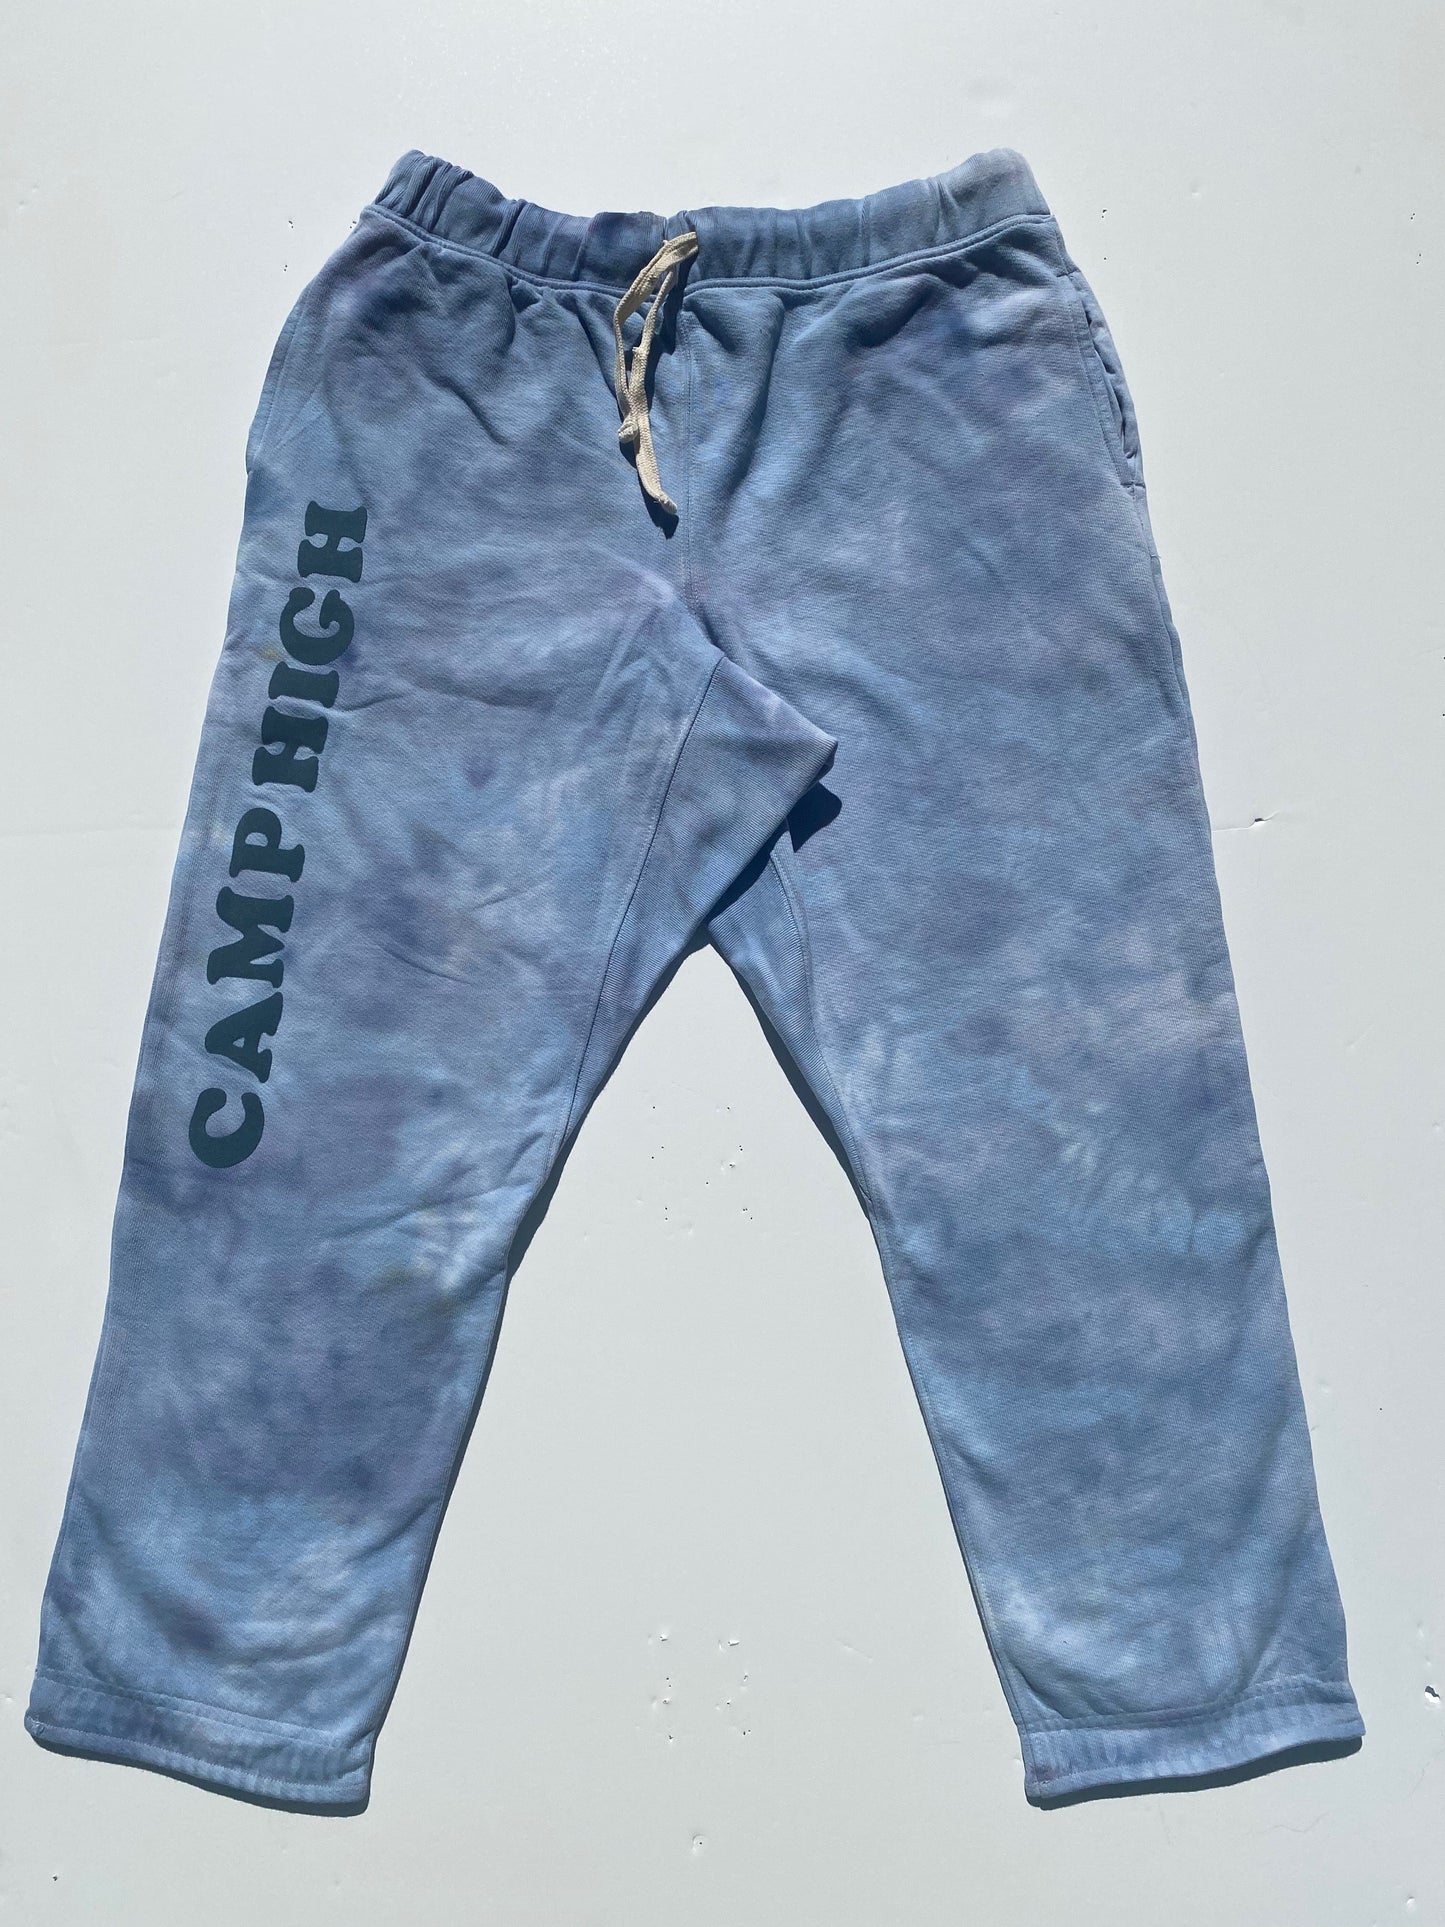 Camp High Tangled up in Blue / XS Wavy Counselor Lounge Pant